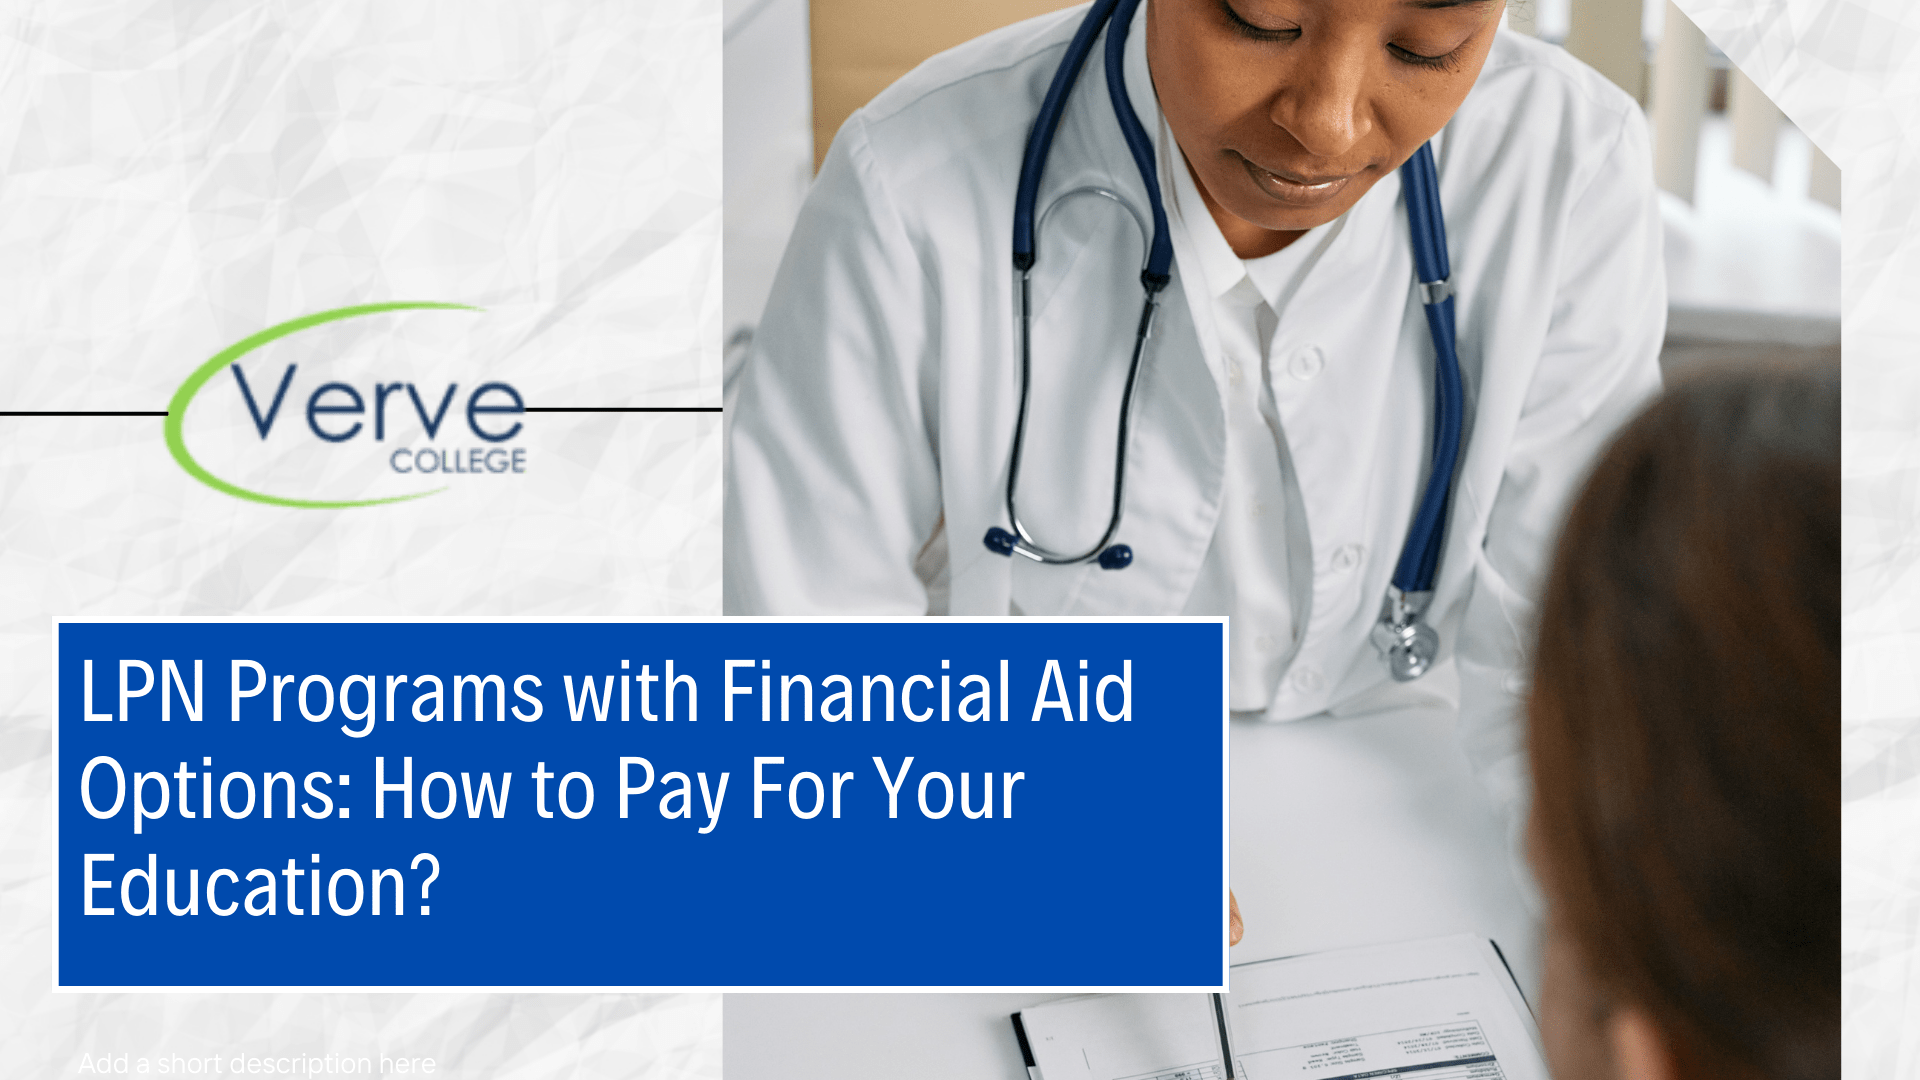 LPN Programs with Financial Aid Options: How to Pay For Your Education?